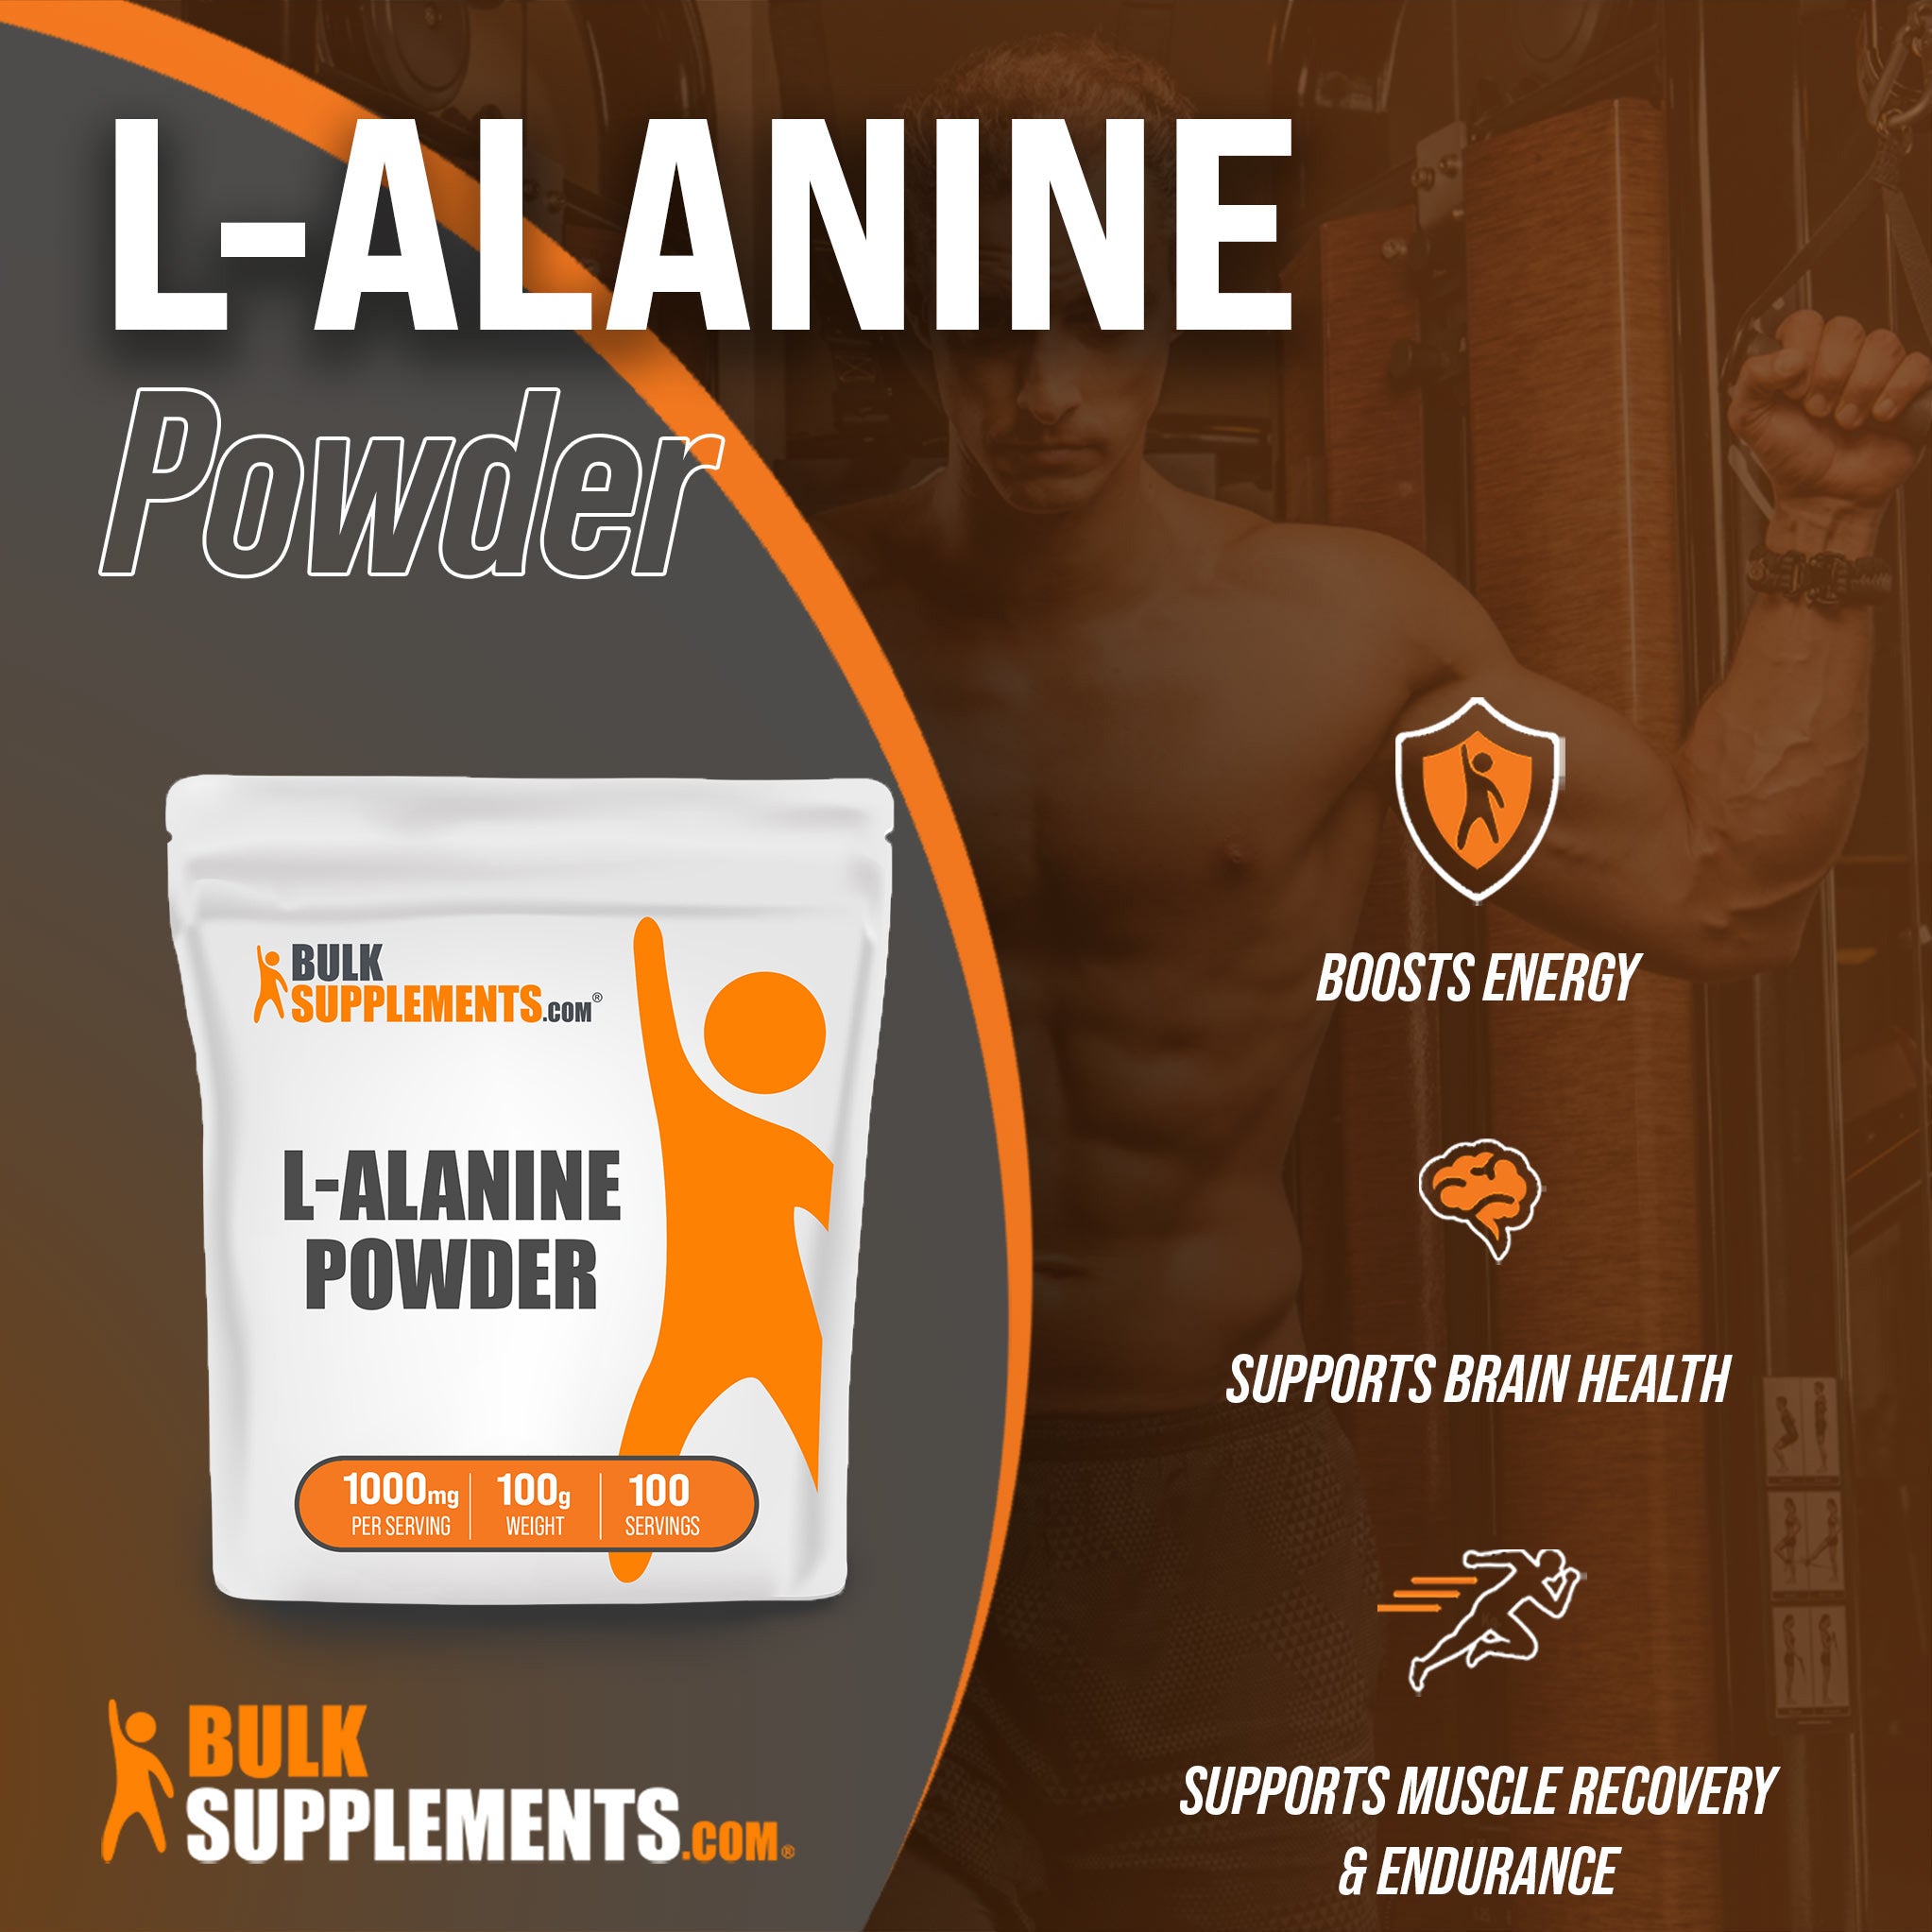 Benefits of L-Alanine: boosts energy, supports brain health, supports muscle recovery and endurance